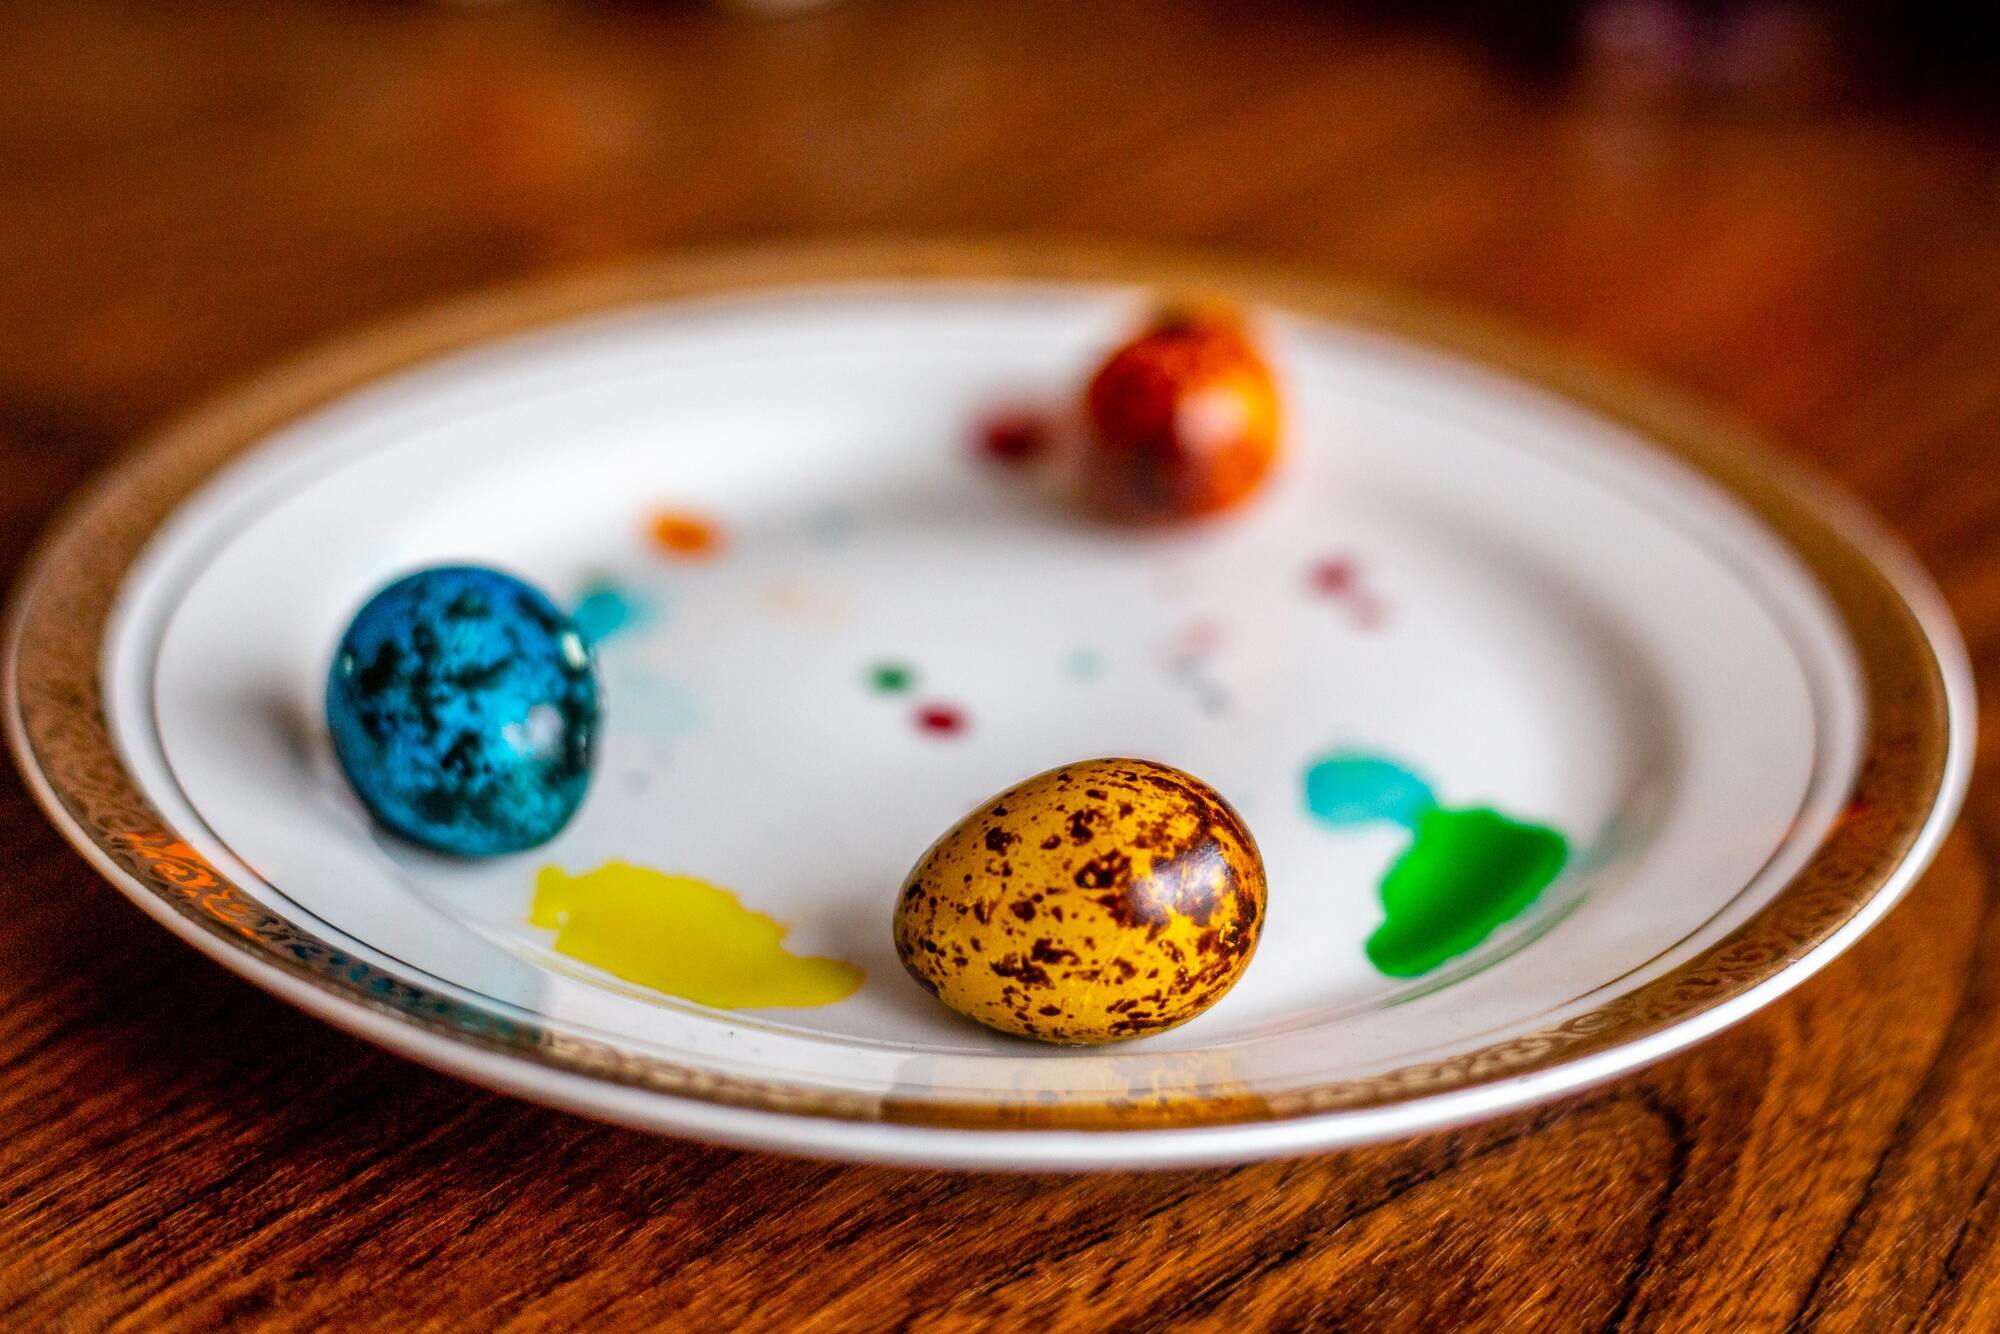 How to dye Easter eggs with coffee